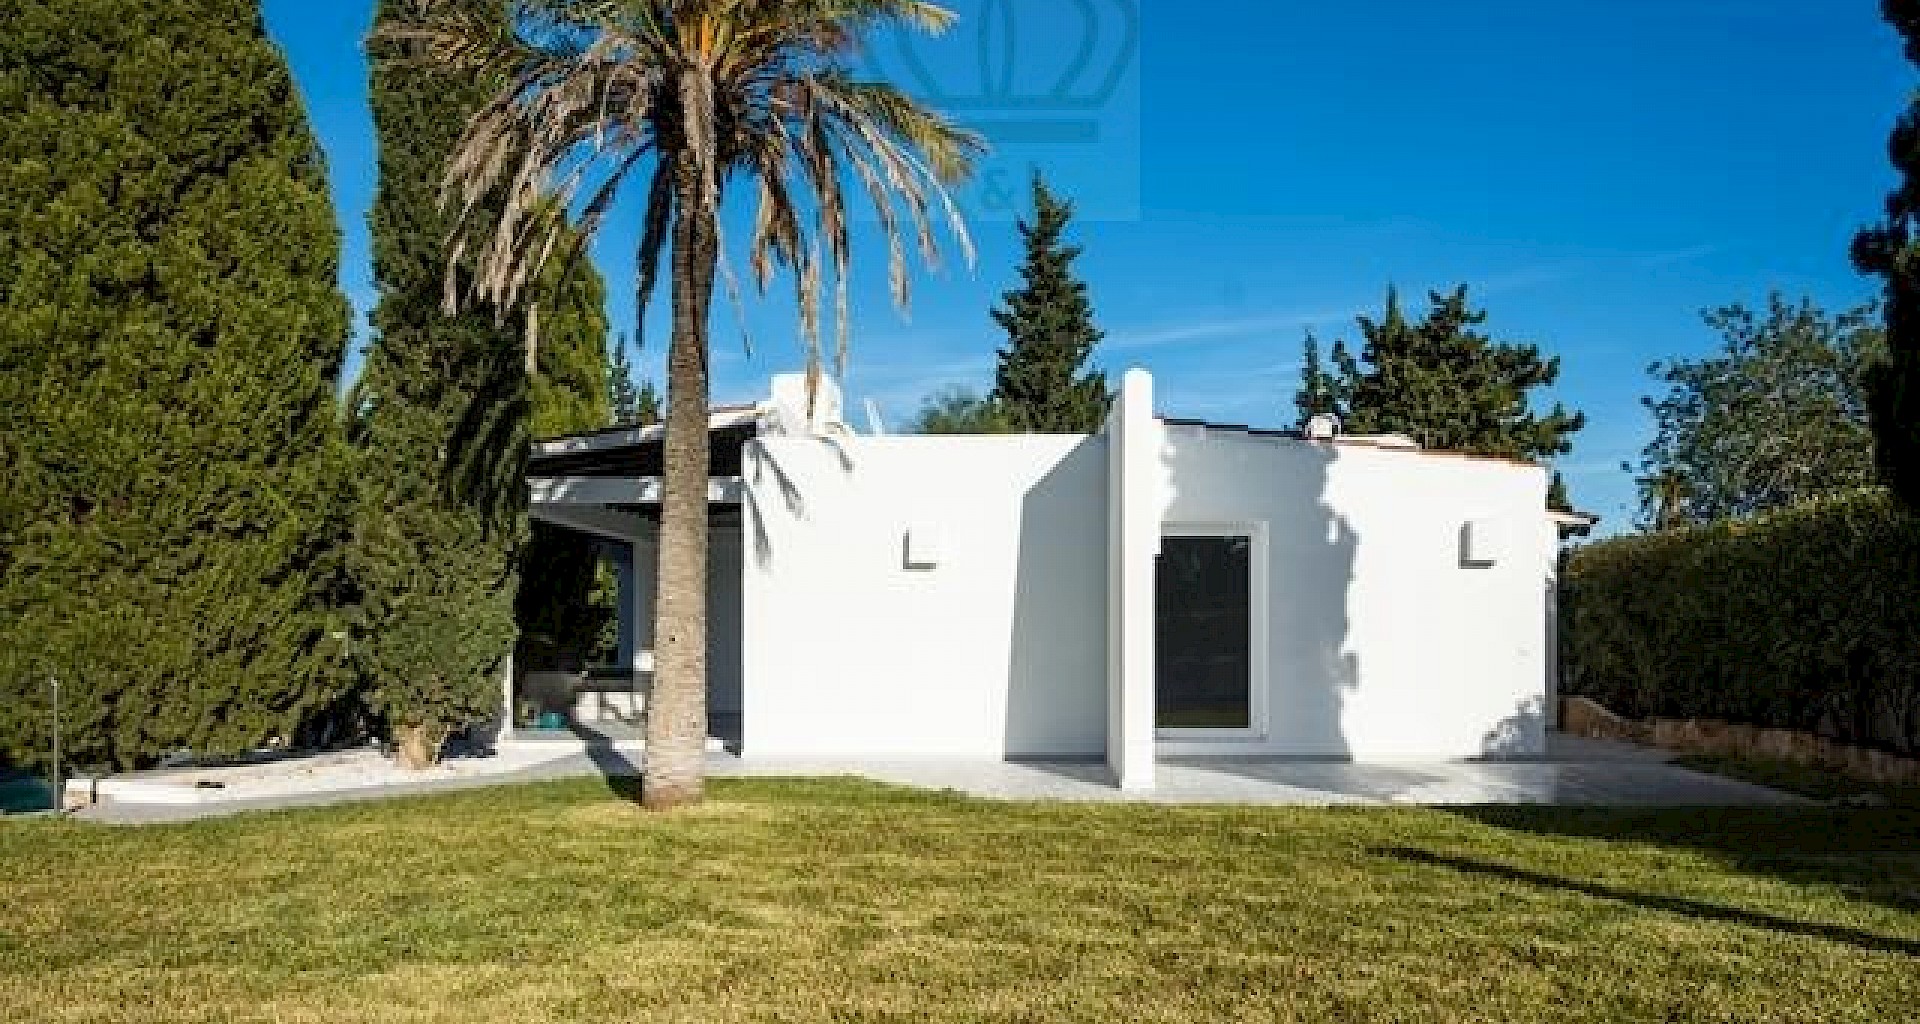 KROHN & LUEDEMANN Completely renovated house in Ibiza with pool and lots of privacy Benimussa (15)